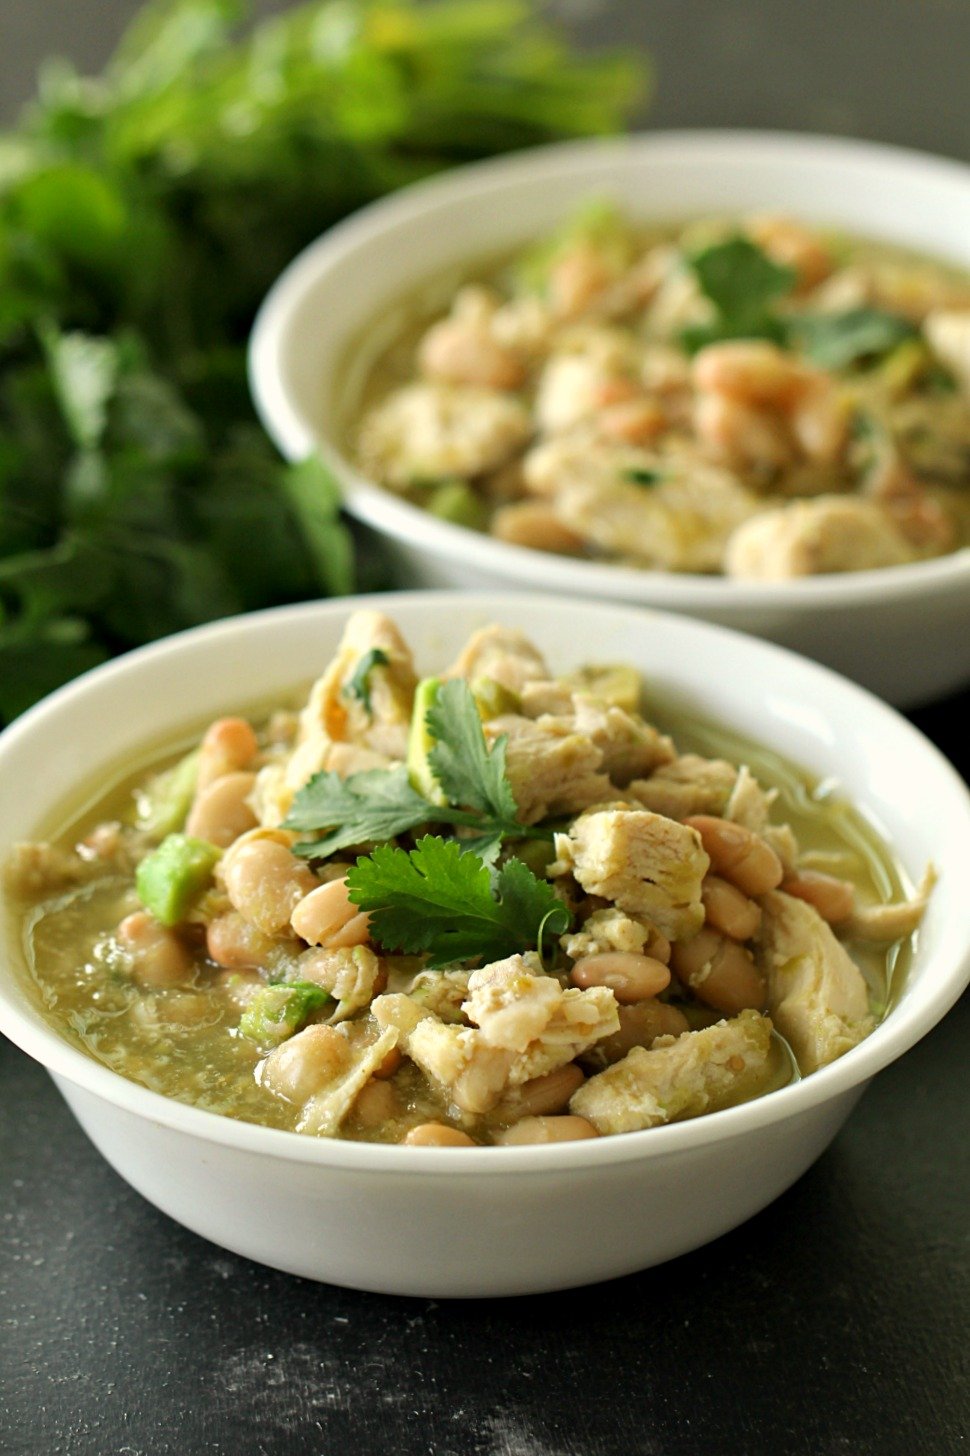 Skinny White Bean Chicken Chili Great For Slow Cooker,How To Clean Porcelain Tile Floors Without Streaks